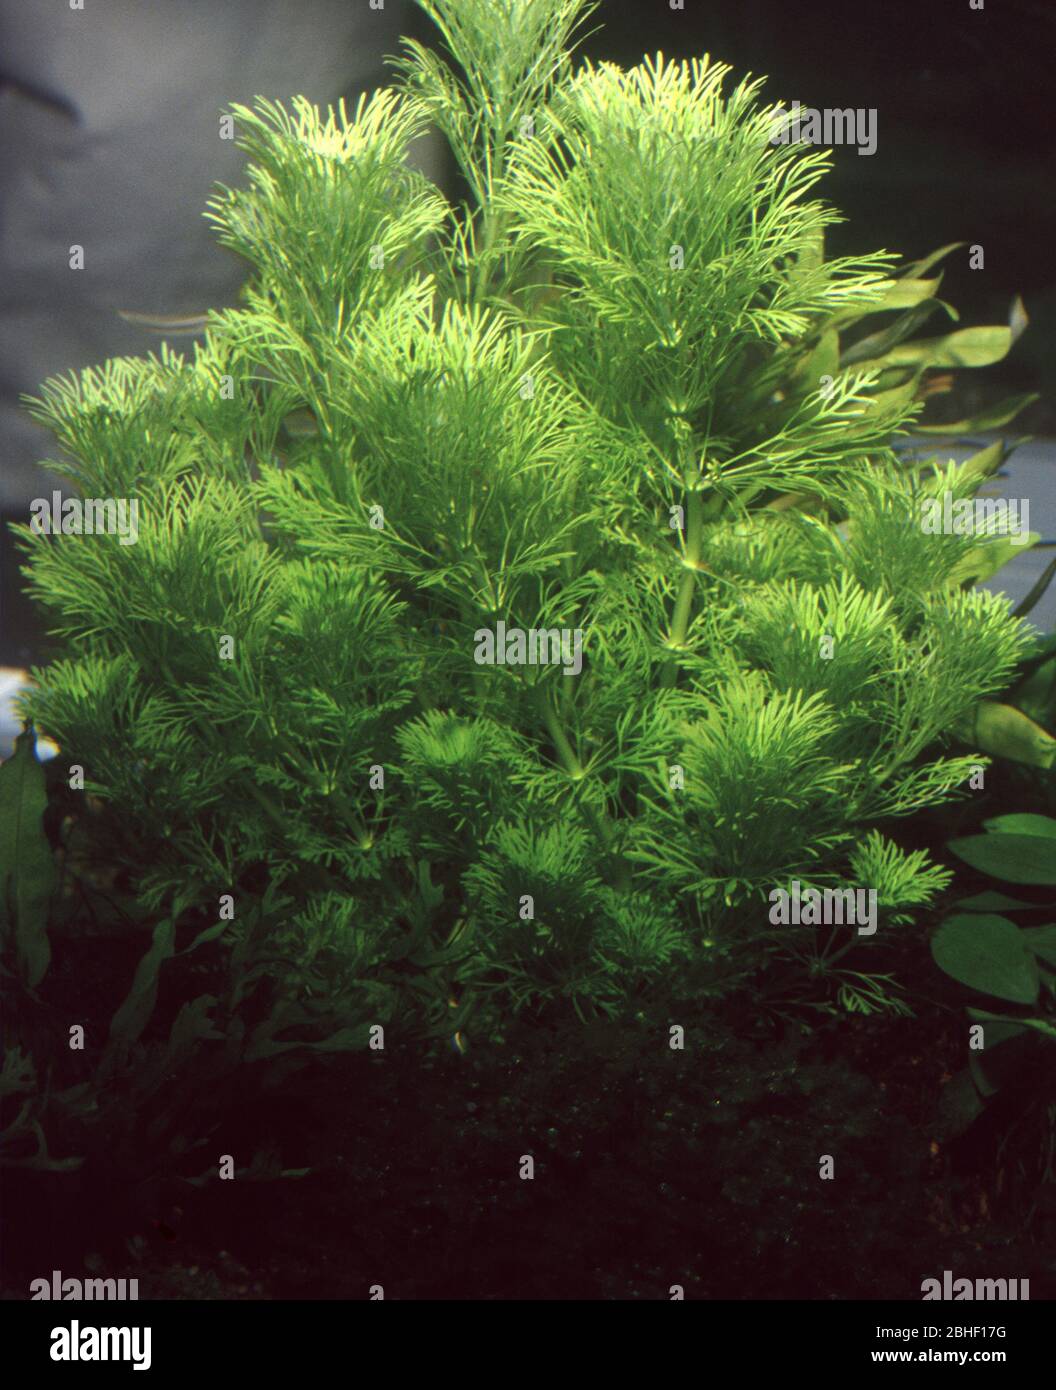 Limnophila sessiliflora, known as dwarf ambulia and Asian marshweed Stock Photo